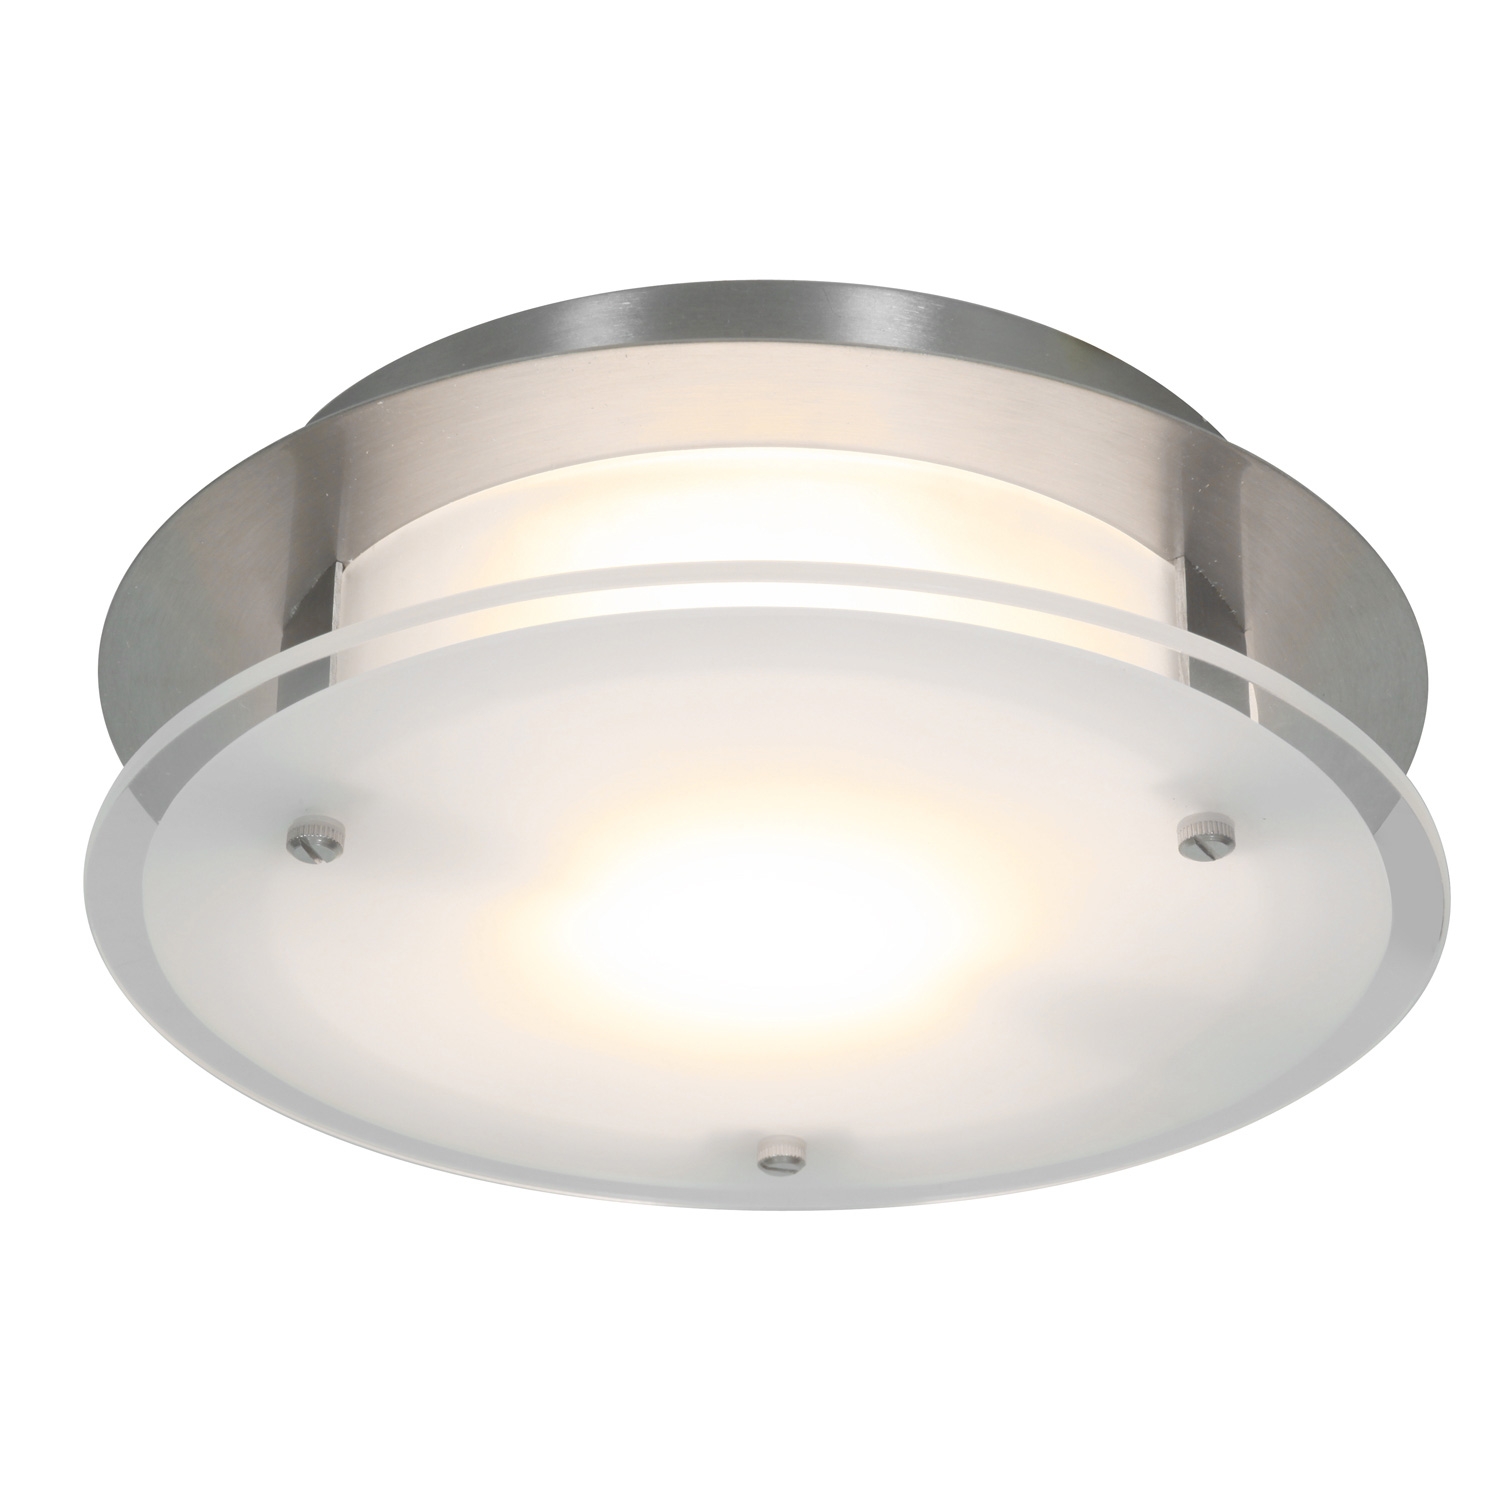 Round Ceiling Exhaust Fan With Light1500 X 1500